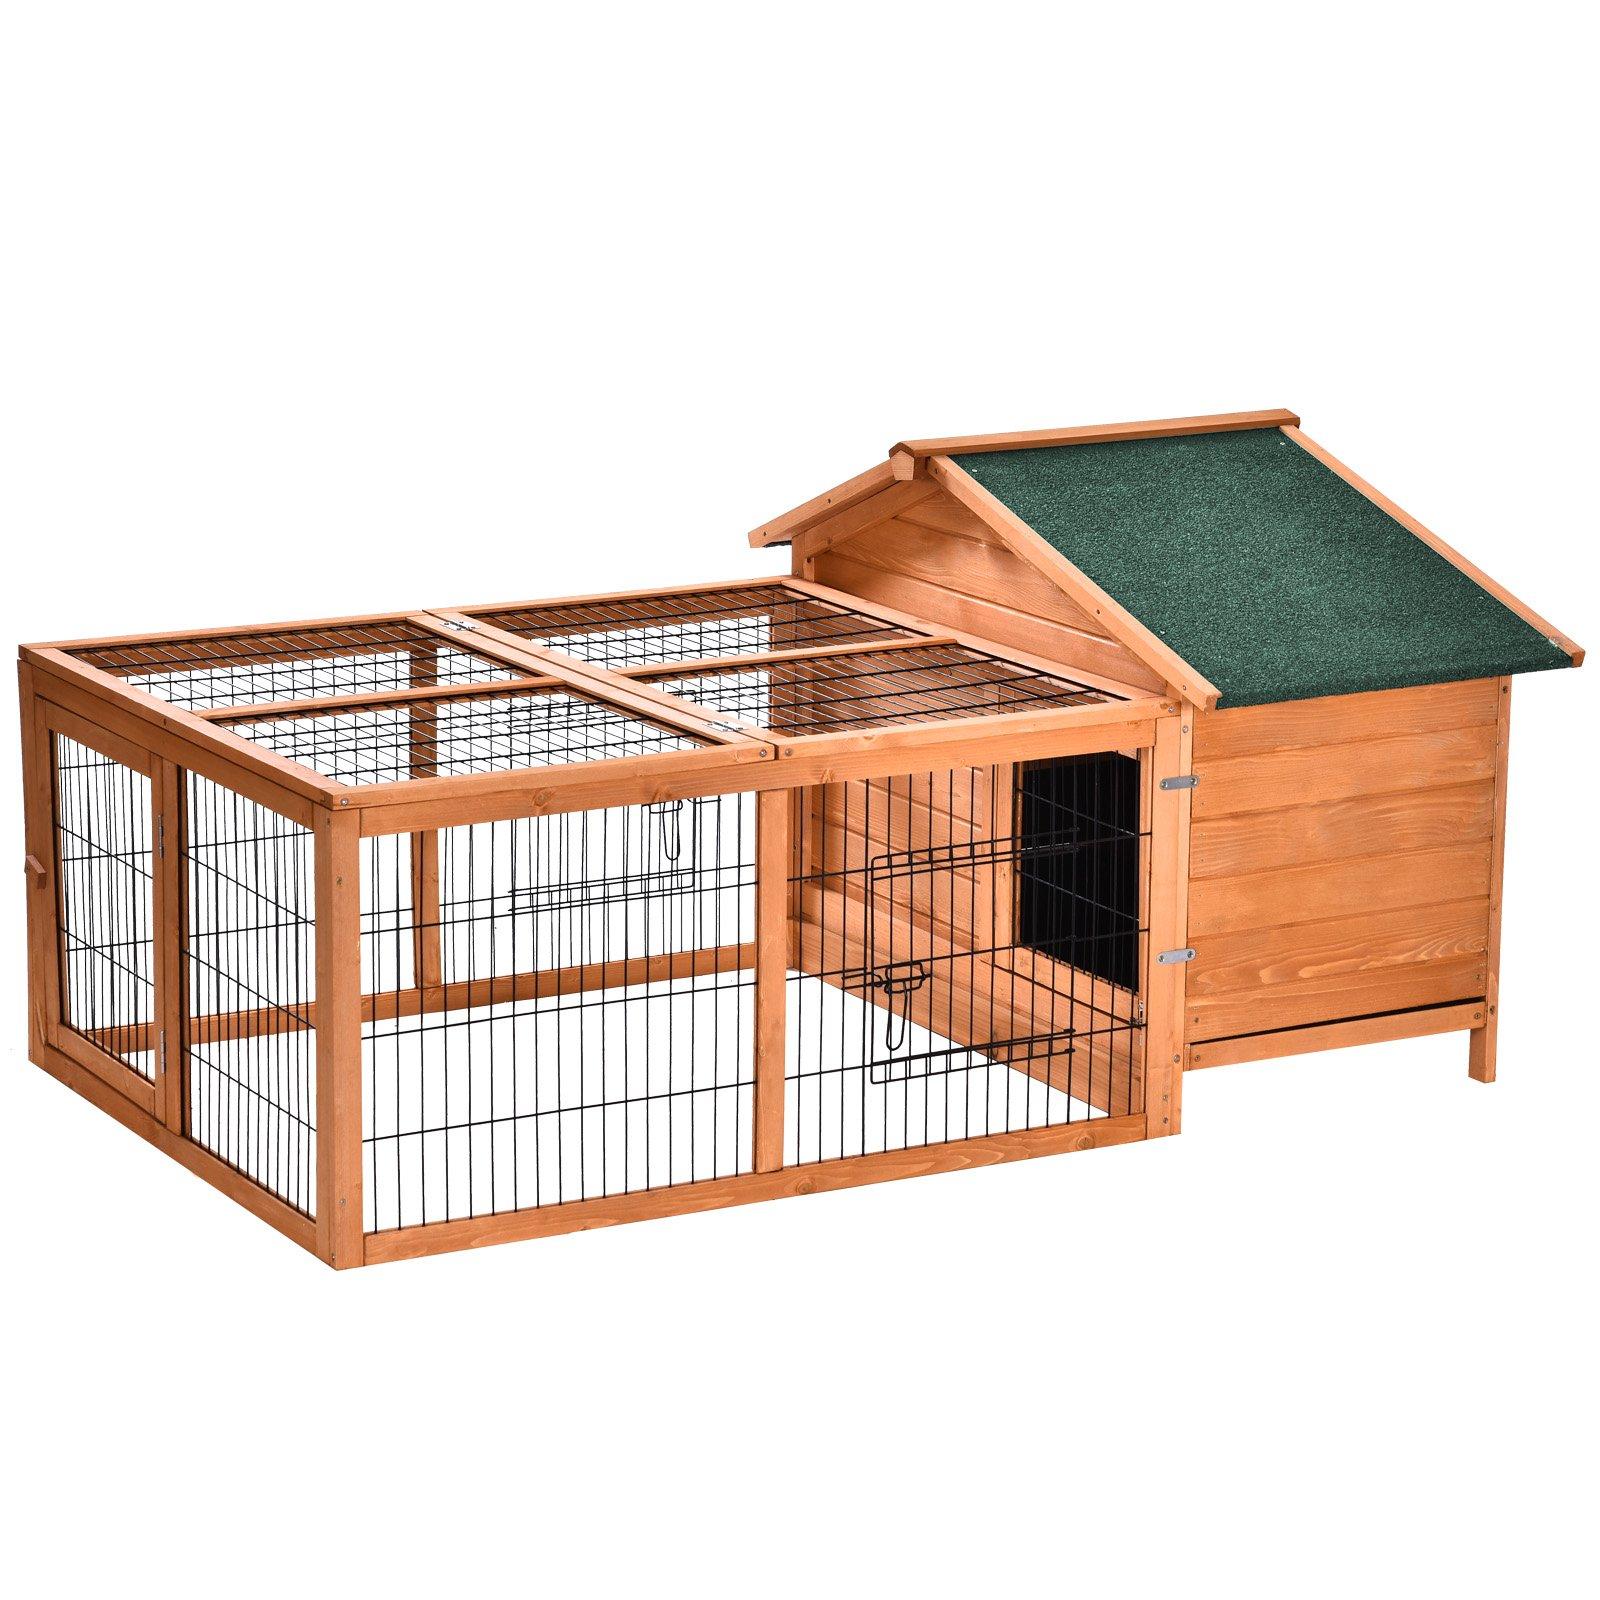 Wooden Rabbit Hutch Detachable Pet House with Openable Run & Roof